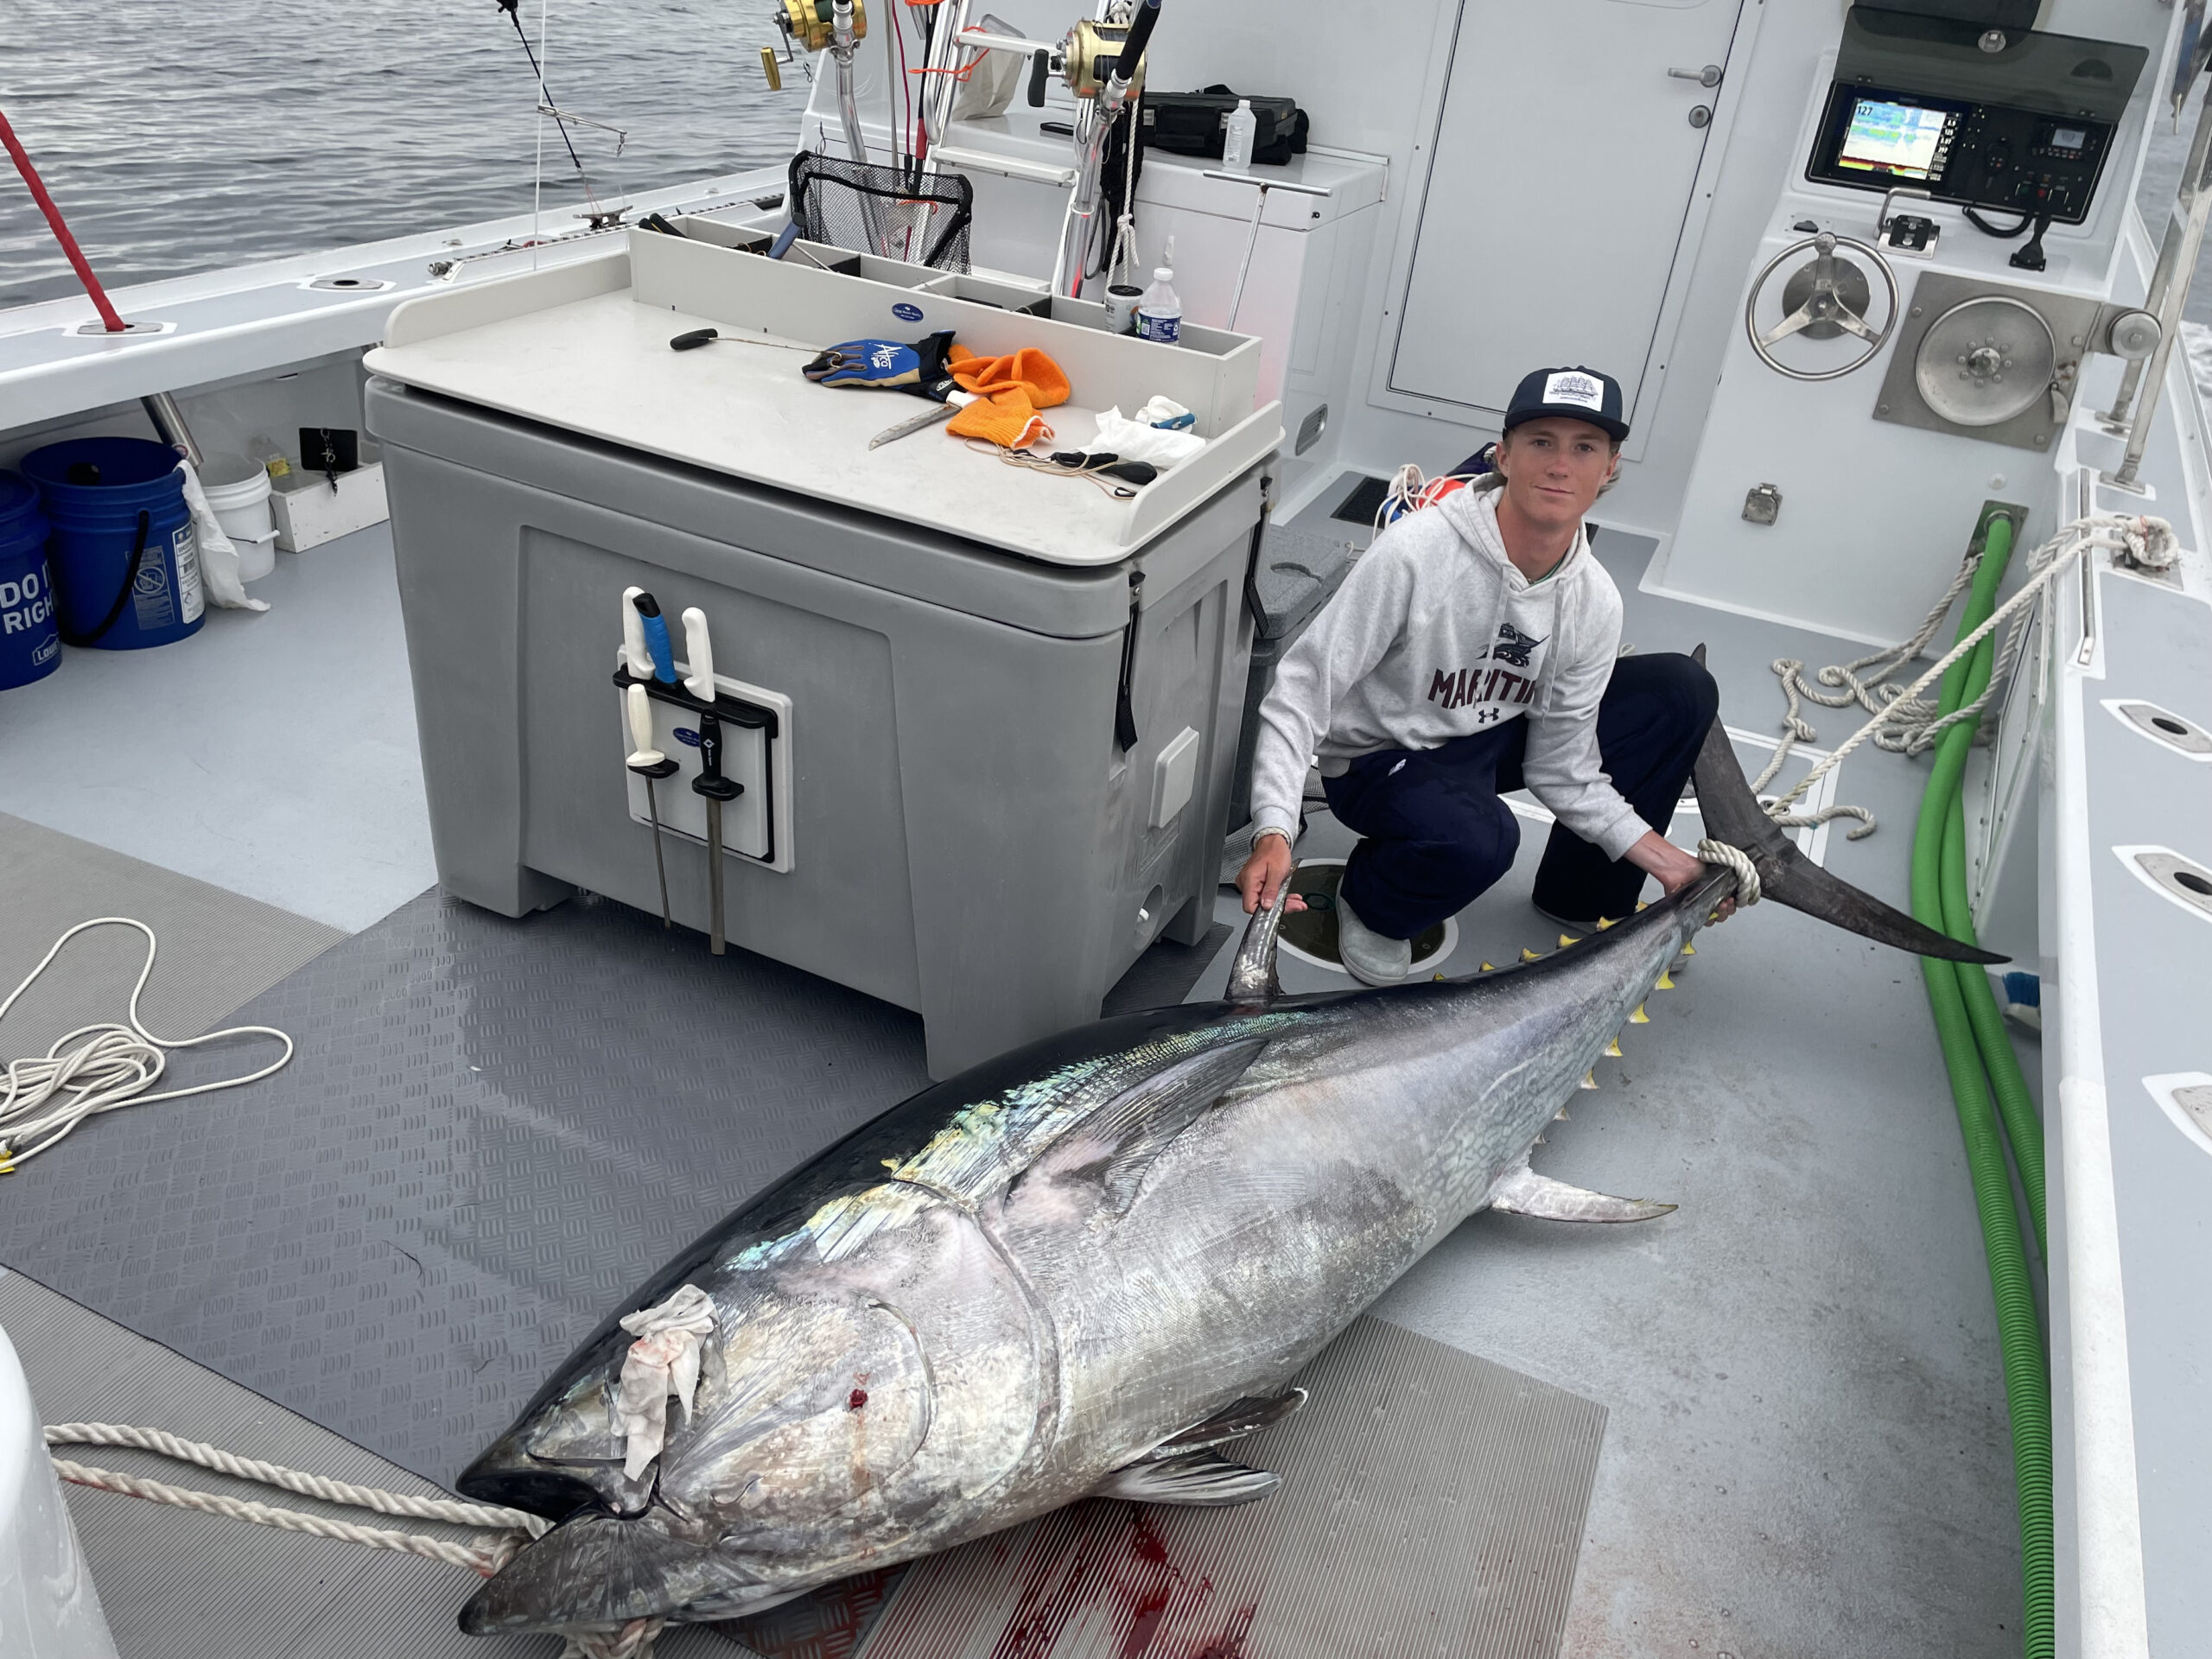 Giant bluefin tuna, like this one that Harrison Hanley helped land recently, have been at the heart of a controversy this week over whether a state can exclude boats from other states from fishing for them near their shores even though they fish themselves are regulated federally.